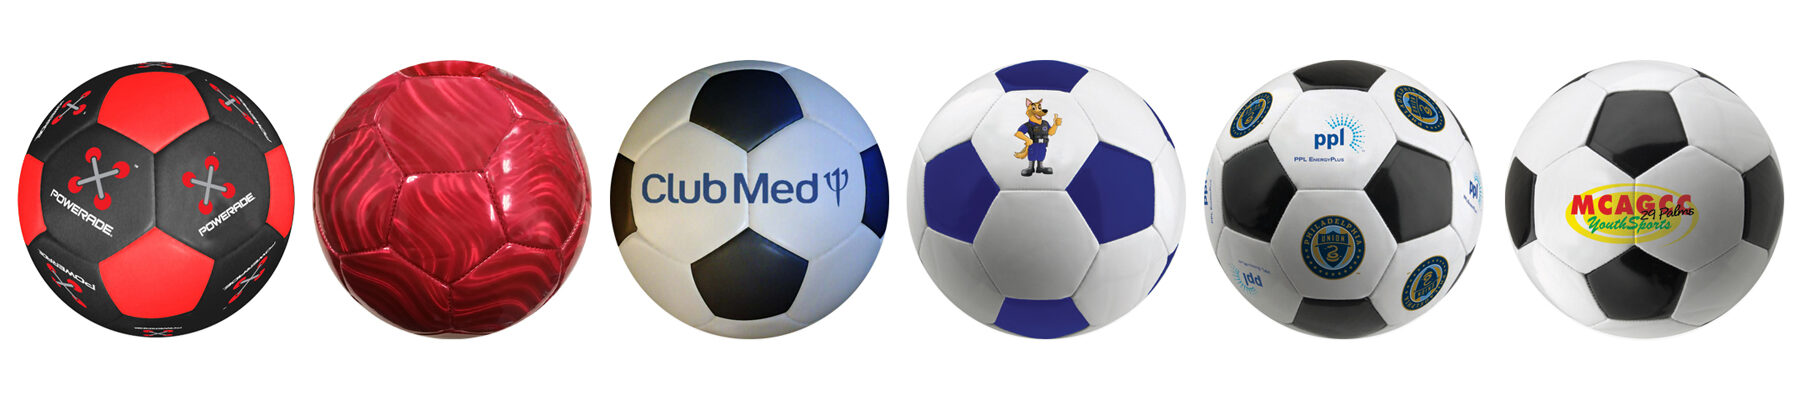 Custom rubber and synthetic leather soccer balls.